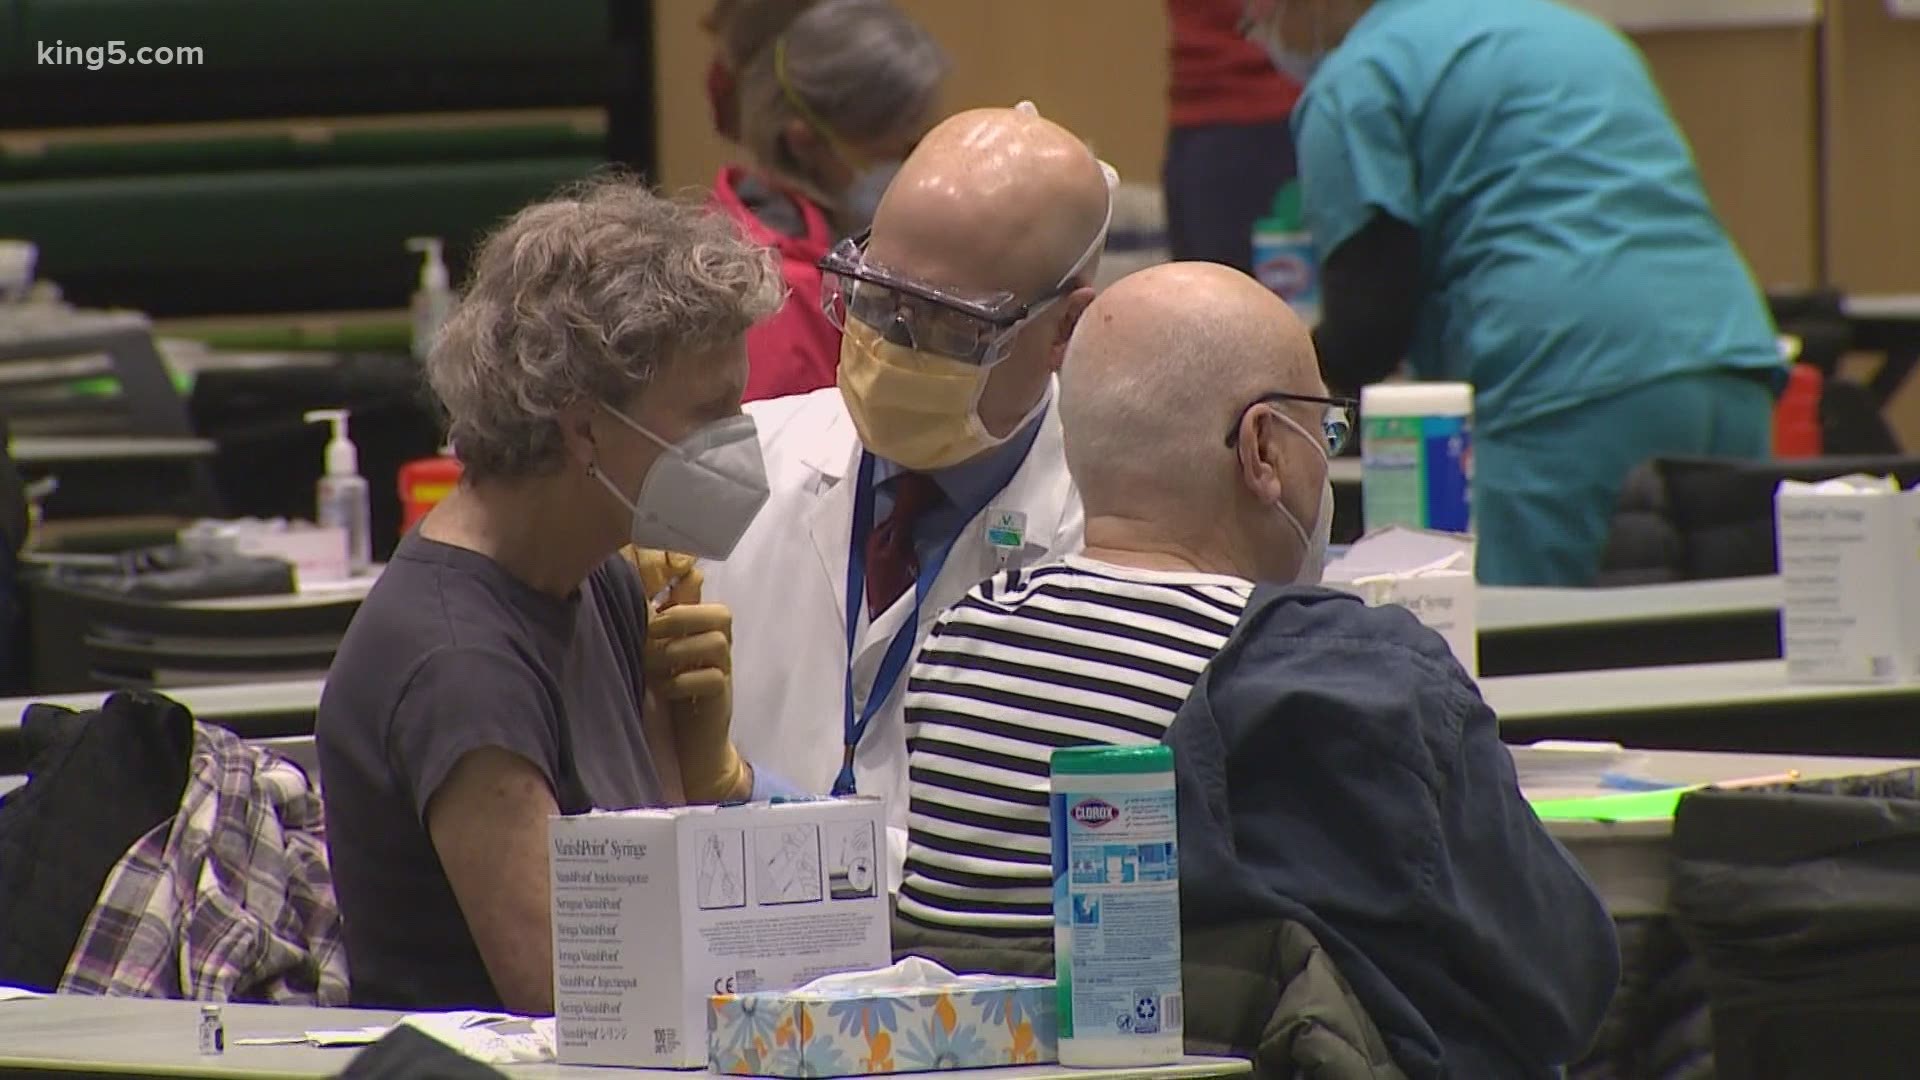 People who met the state's current eligibility requirements were able to receive the vaccine Sunday.